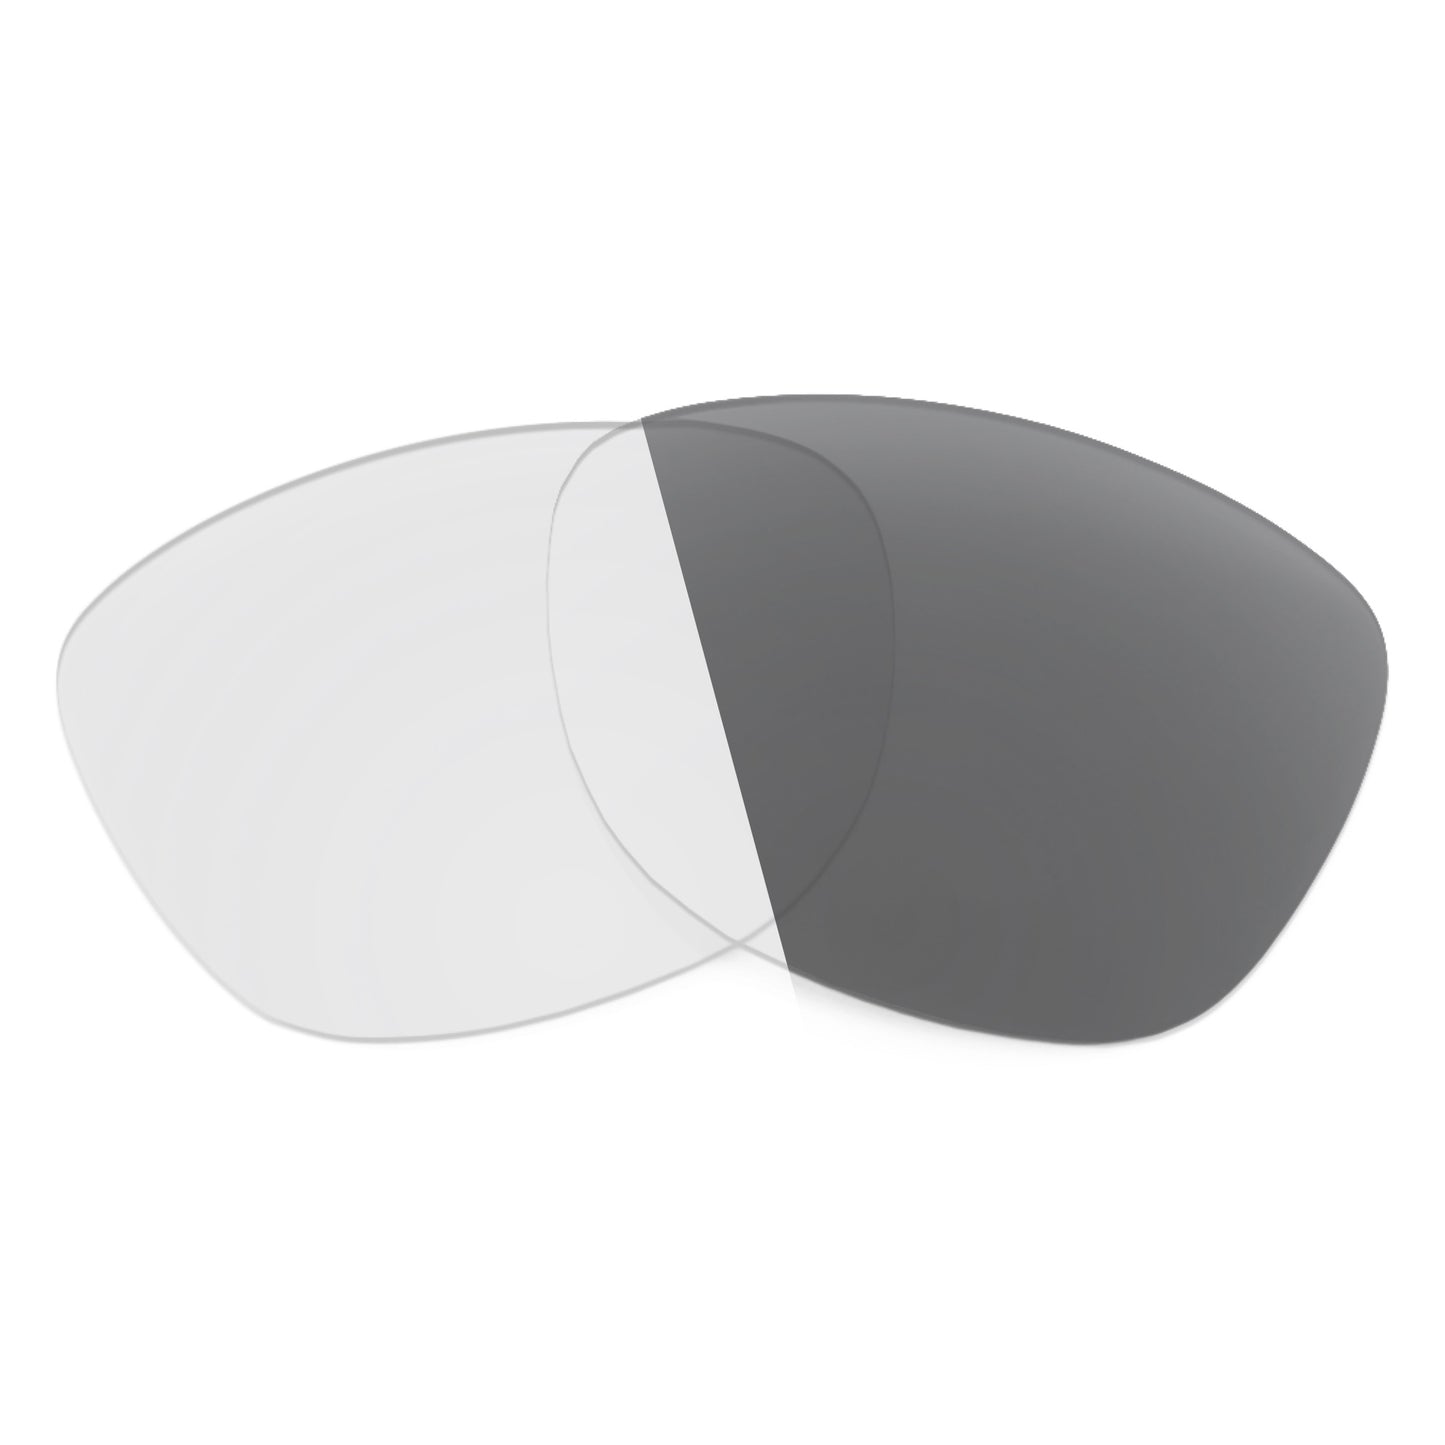 Revant replacement lenses for Costa Double Haul Non-Polarized Adapt Gray Photochromic